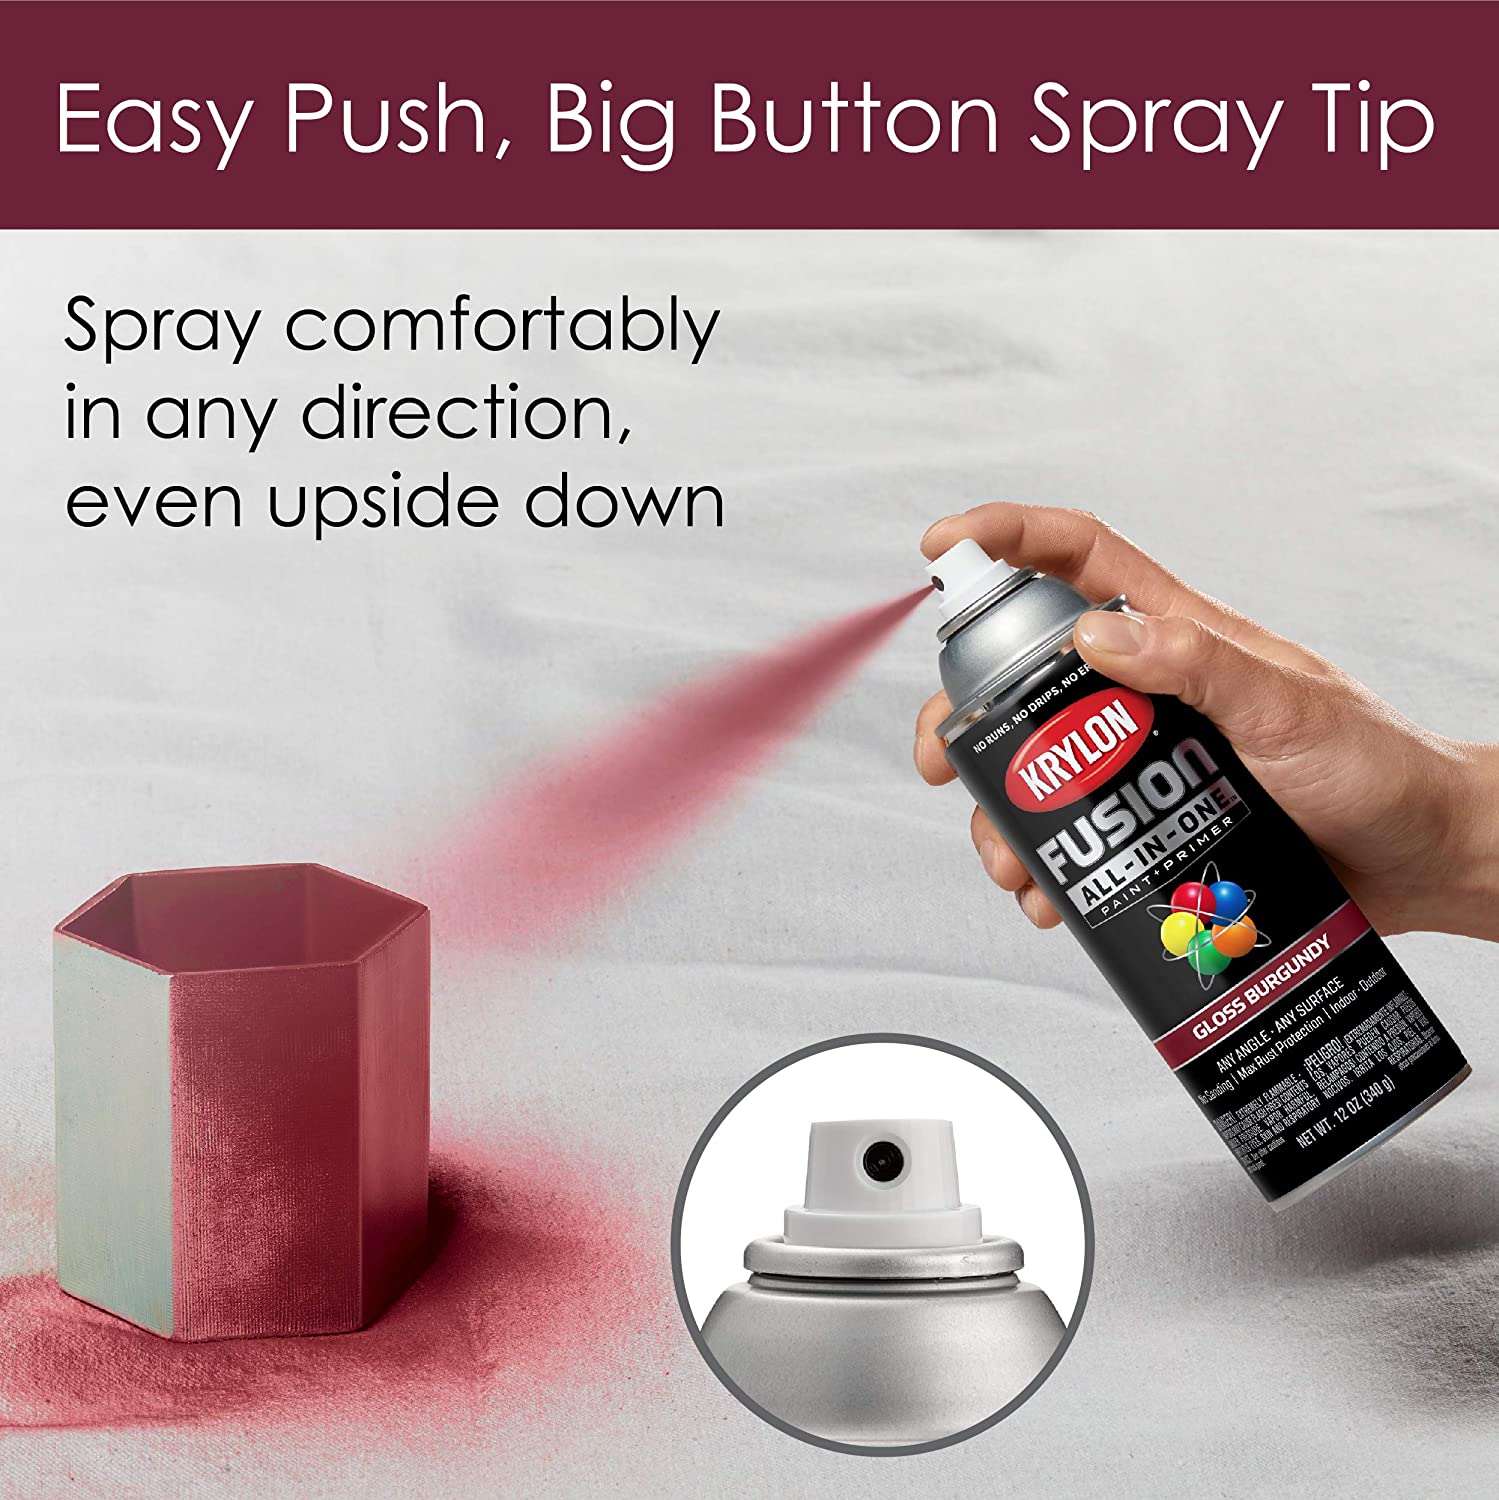 Krylon Fusion All-In-One Spray Paint feature